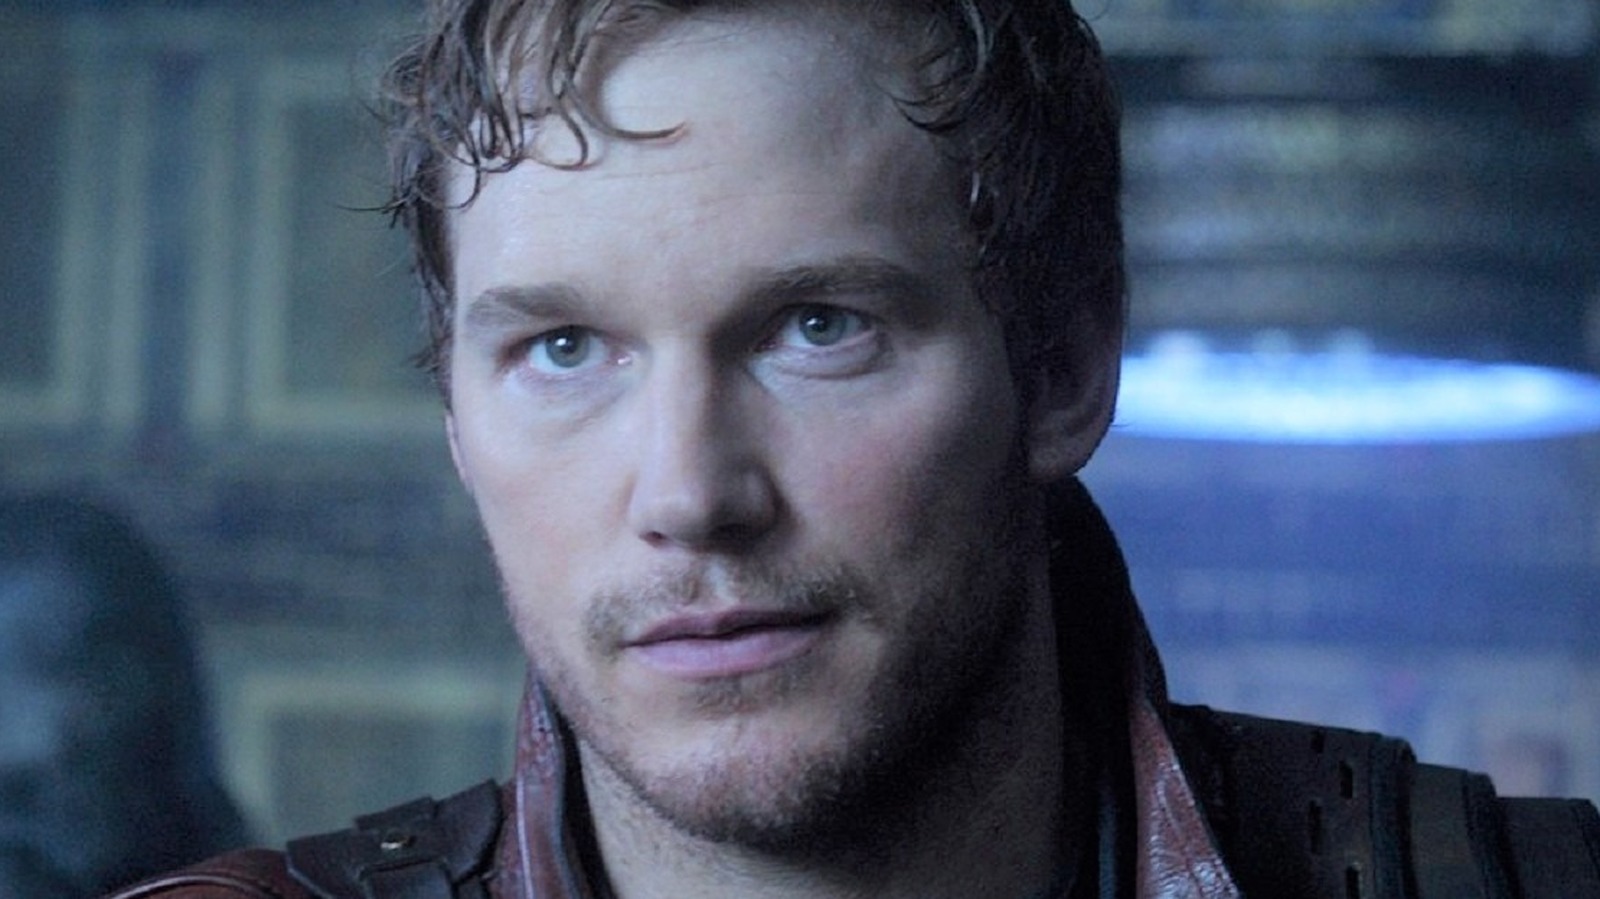 Star-Lord, Ultimate Pop Culture Wiki